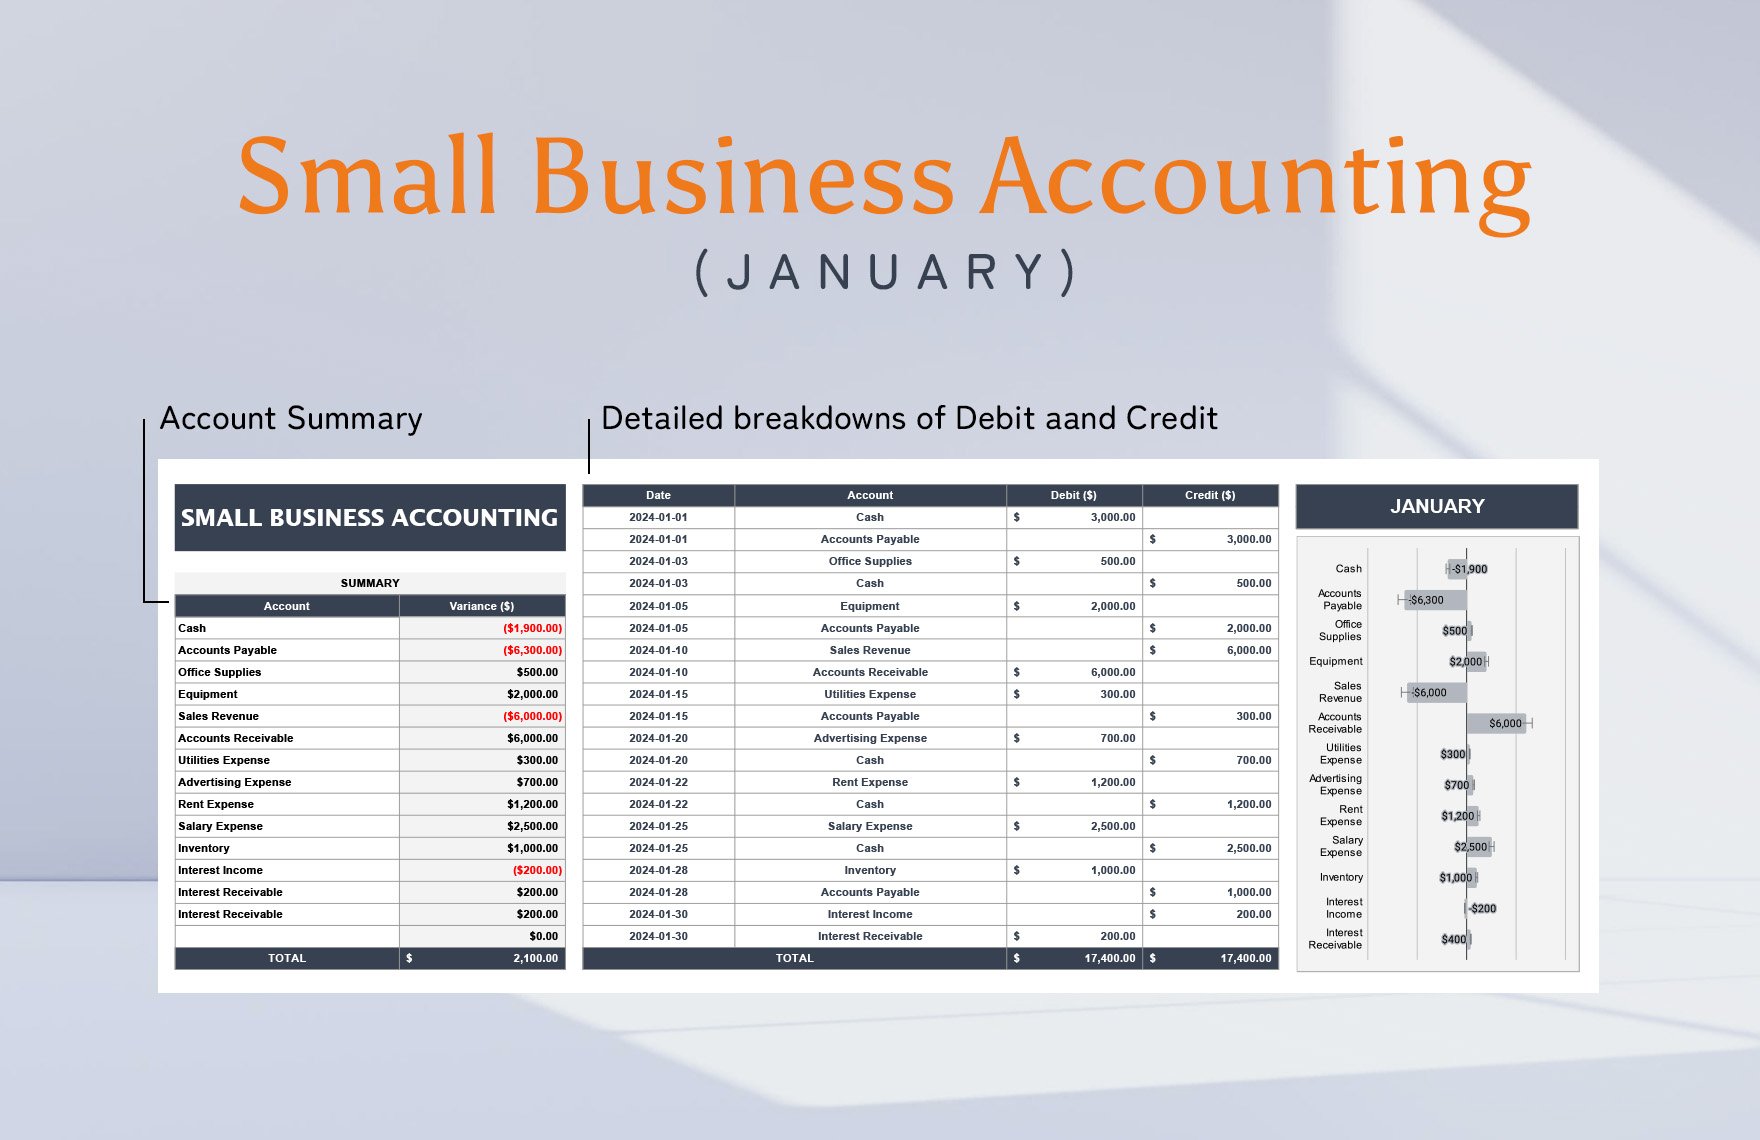 Small Business Accounting Template